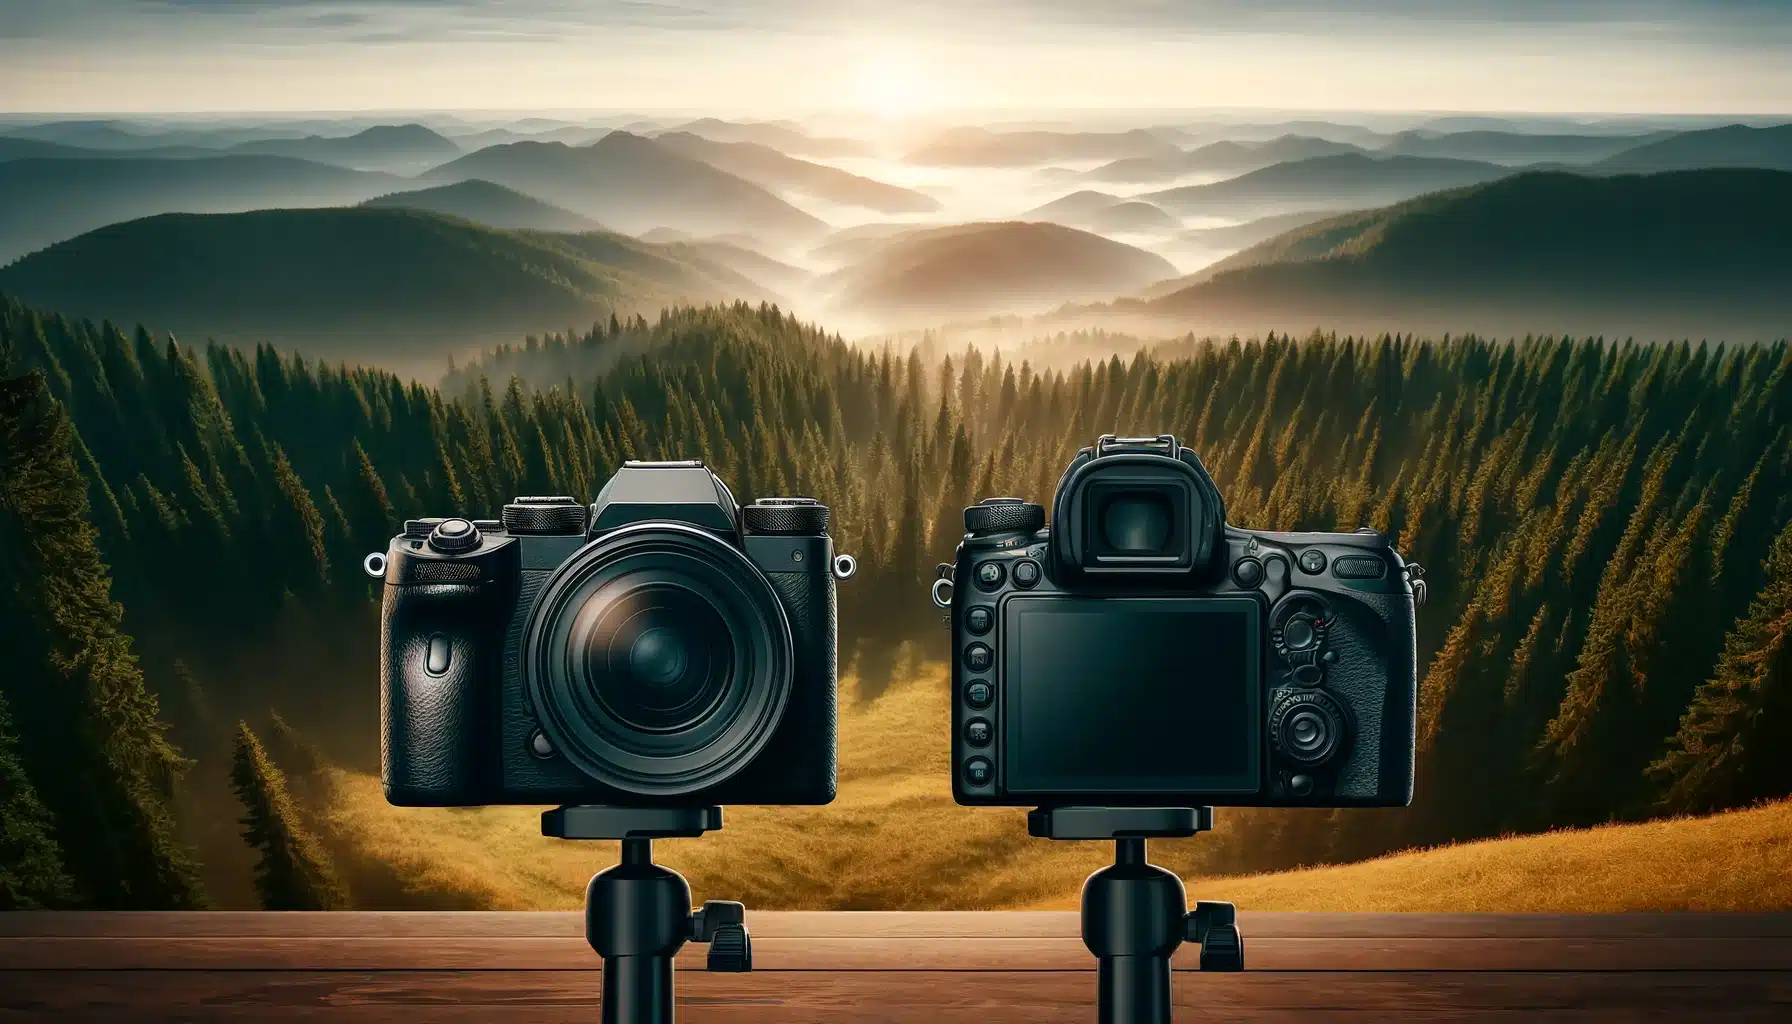 Side-by-side view of mirrorless and DSLR cameras on tripods against a mixed forest and mountain landscape.